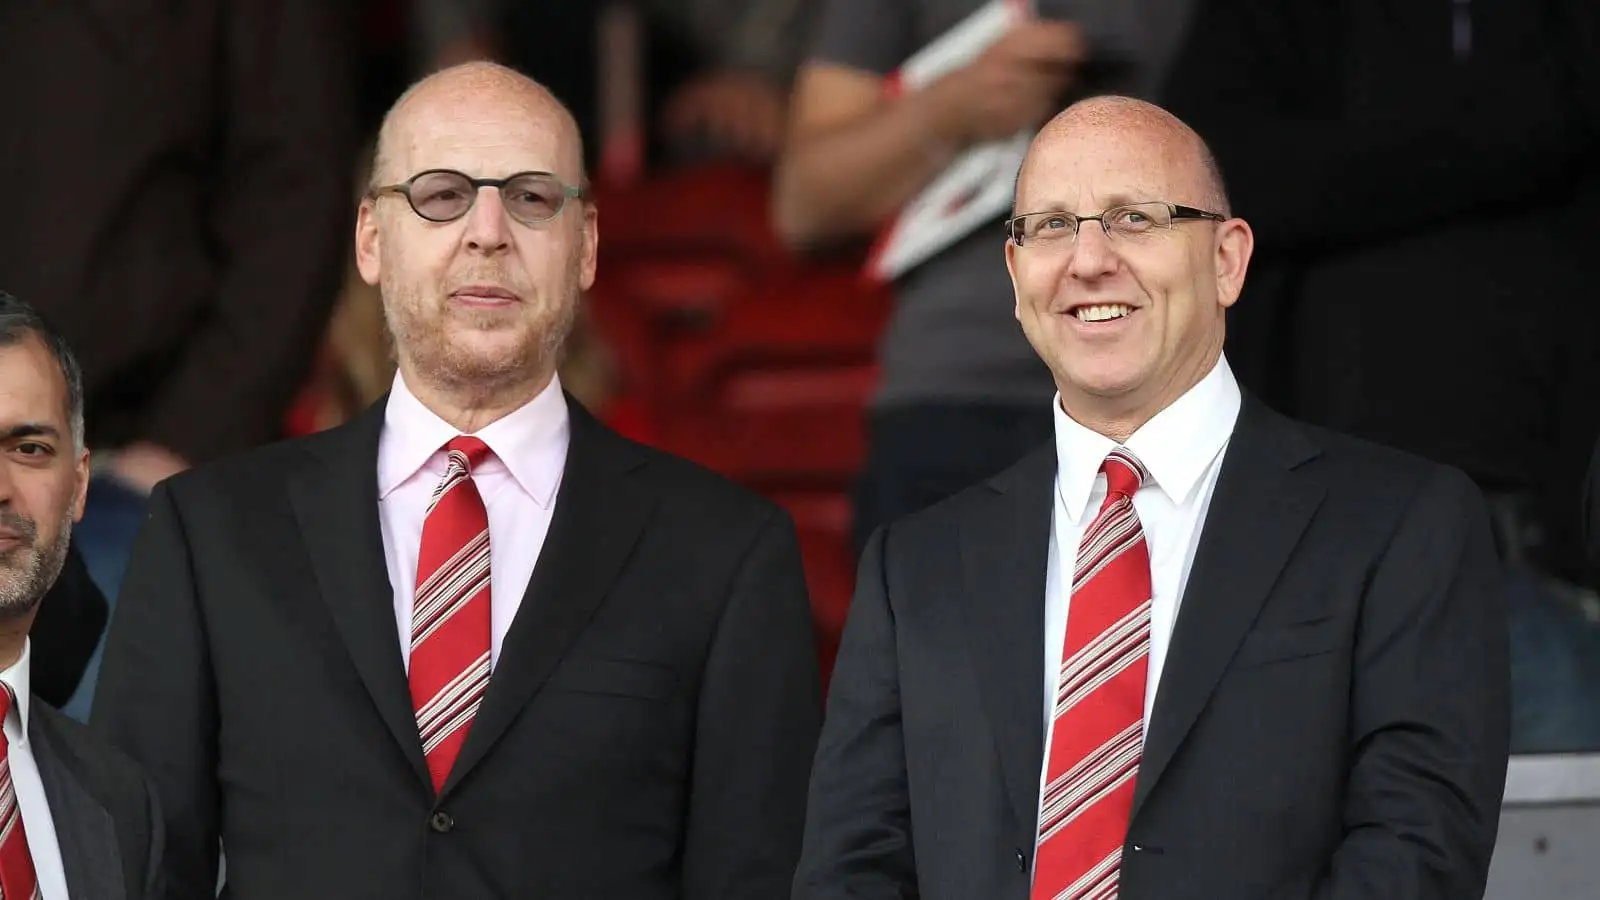 The Glazer family are the owners of Manchester United